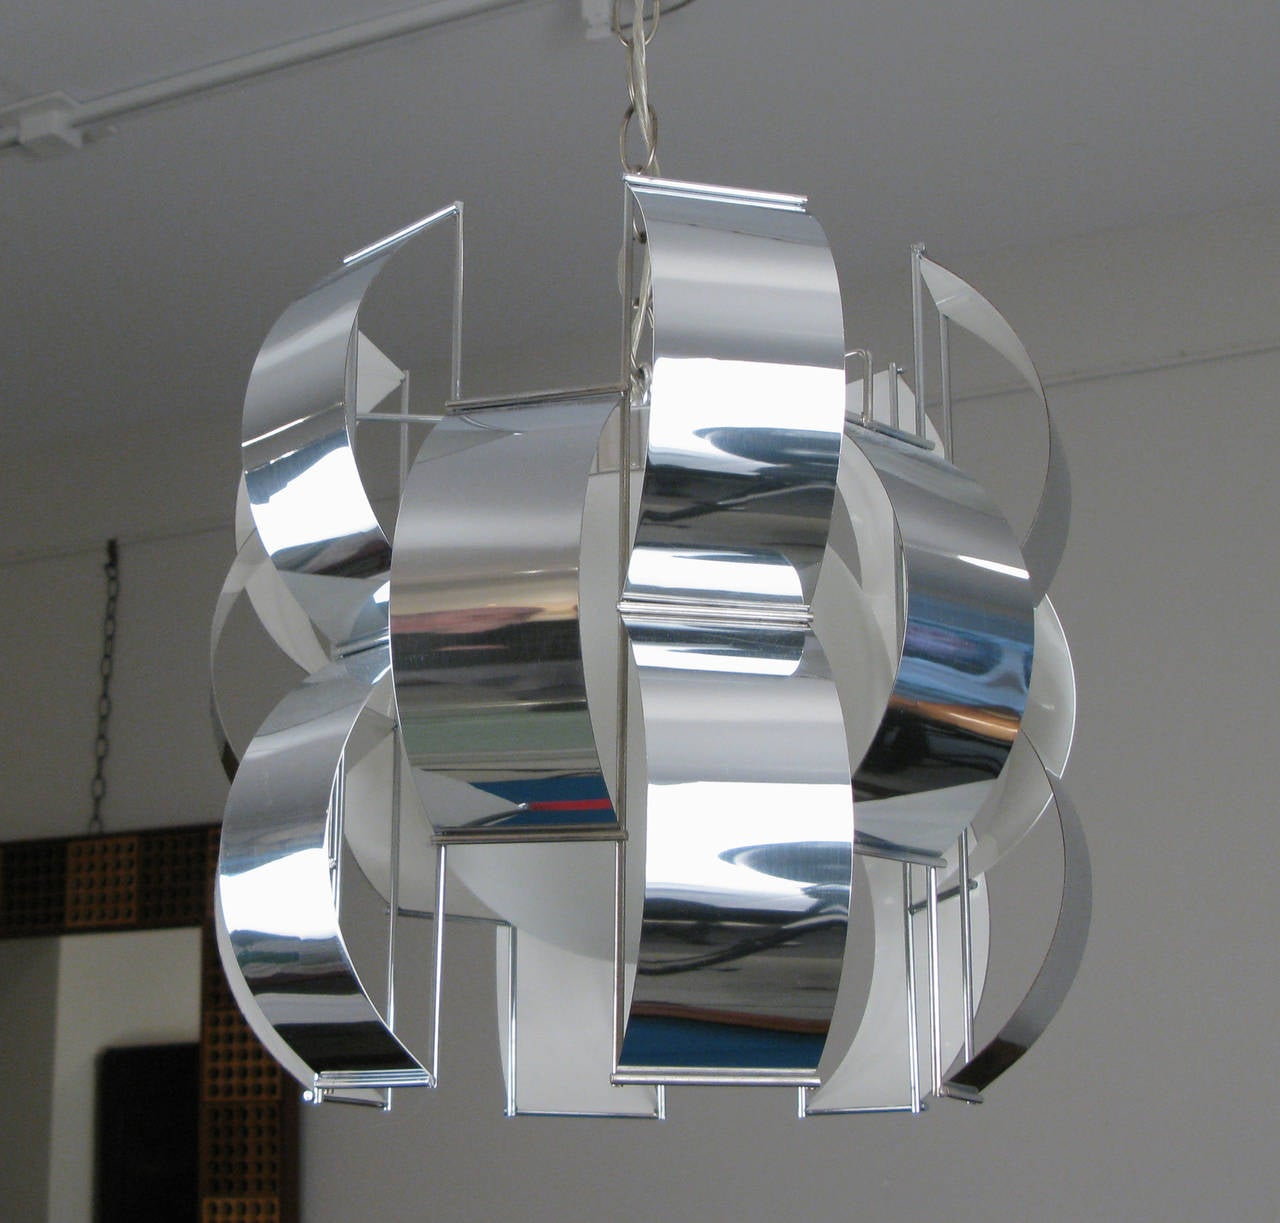 A handsome pendant light from the 70's by Max Sauze. The glass globe and white enamel inside of the chrome fixture gives it a soft glow.